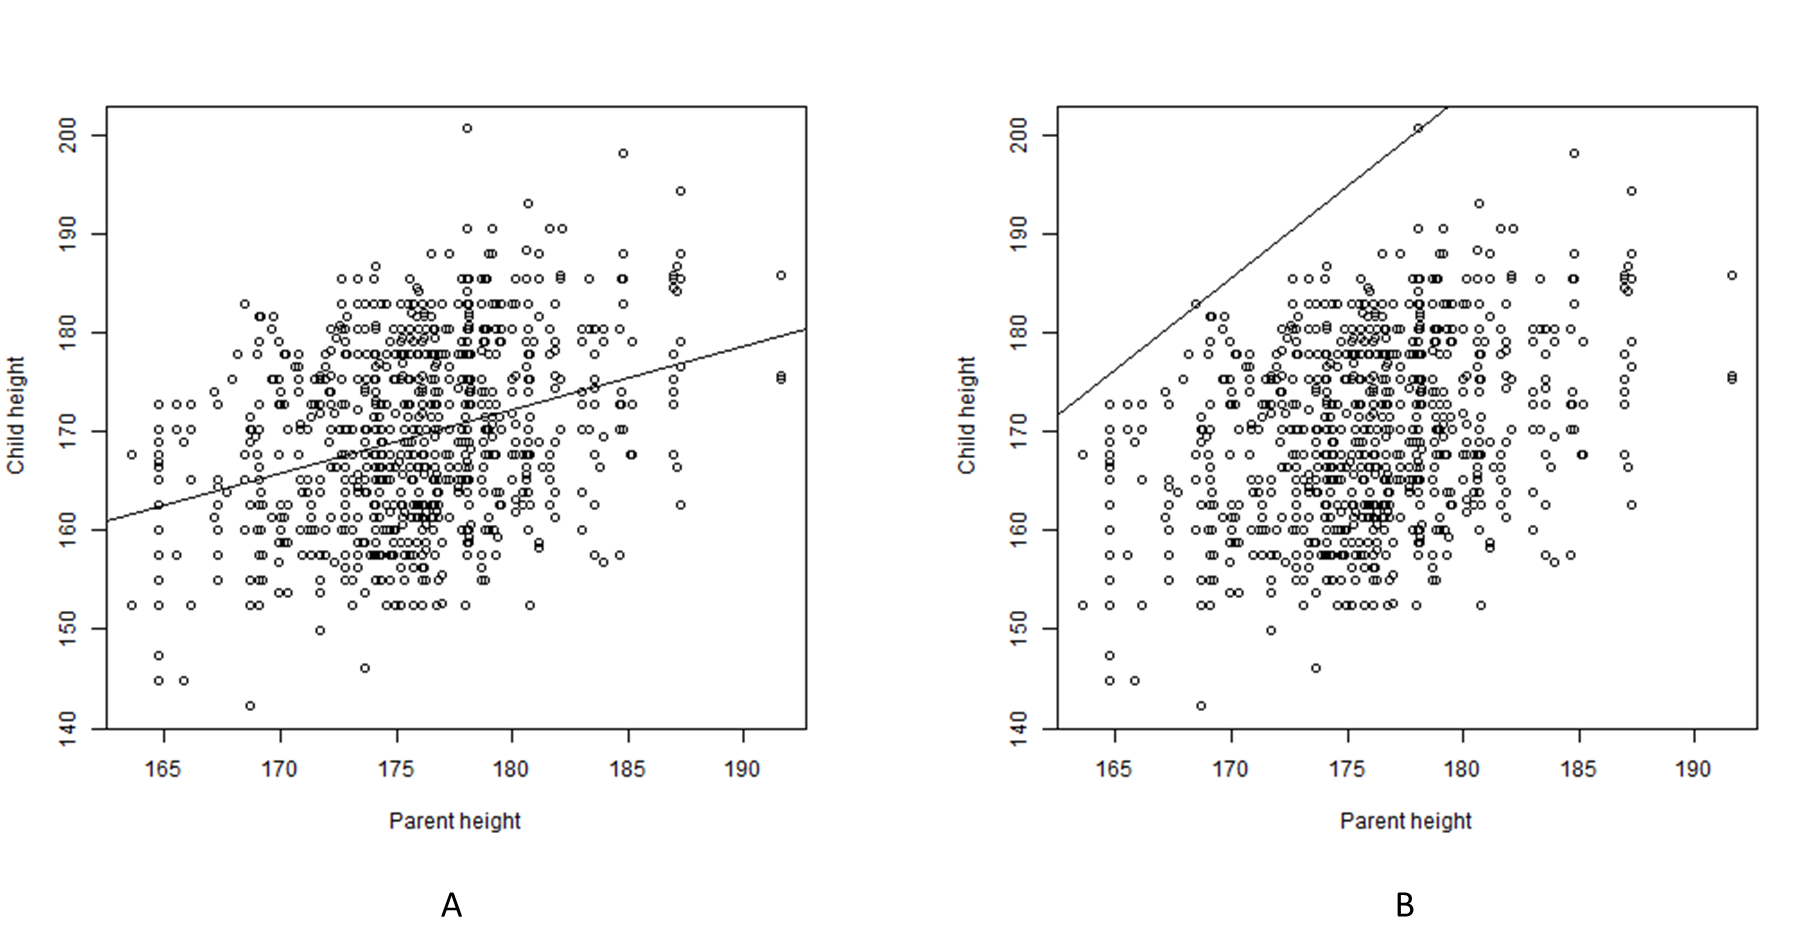 Scatter plots of the relationship between Parent height ($X$) and Child height ($Y$) (after Galton (1886). A. With a regression line. B. With a ceiling line.